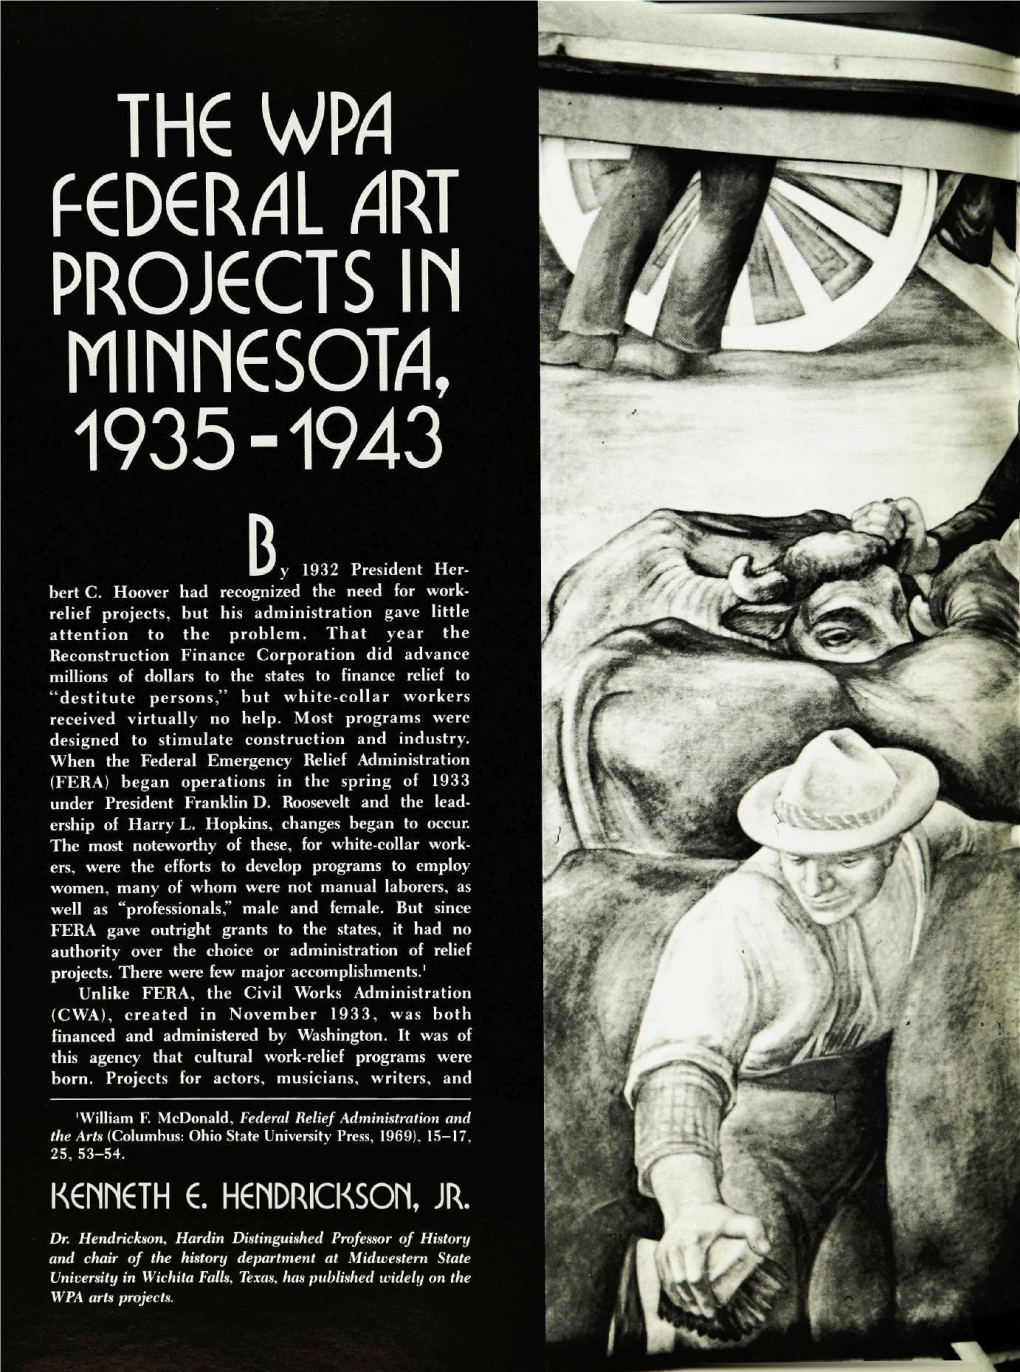 The WPA Federal Art Projects in Minnesota, 1935-1943 / Kenneth E